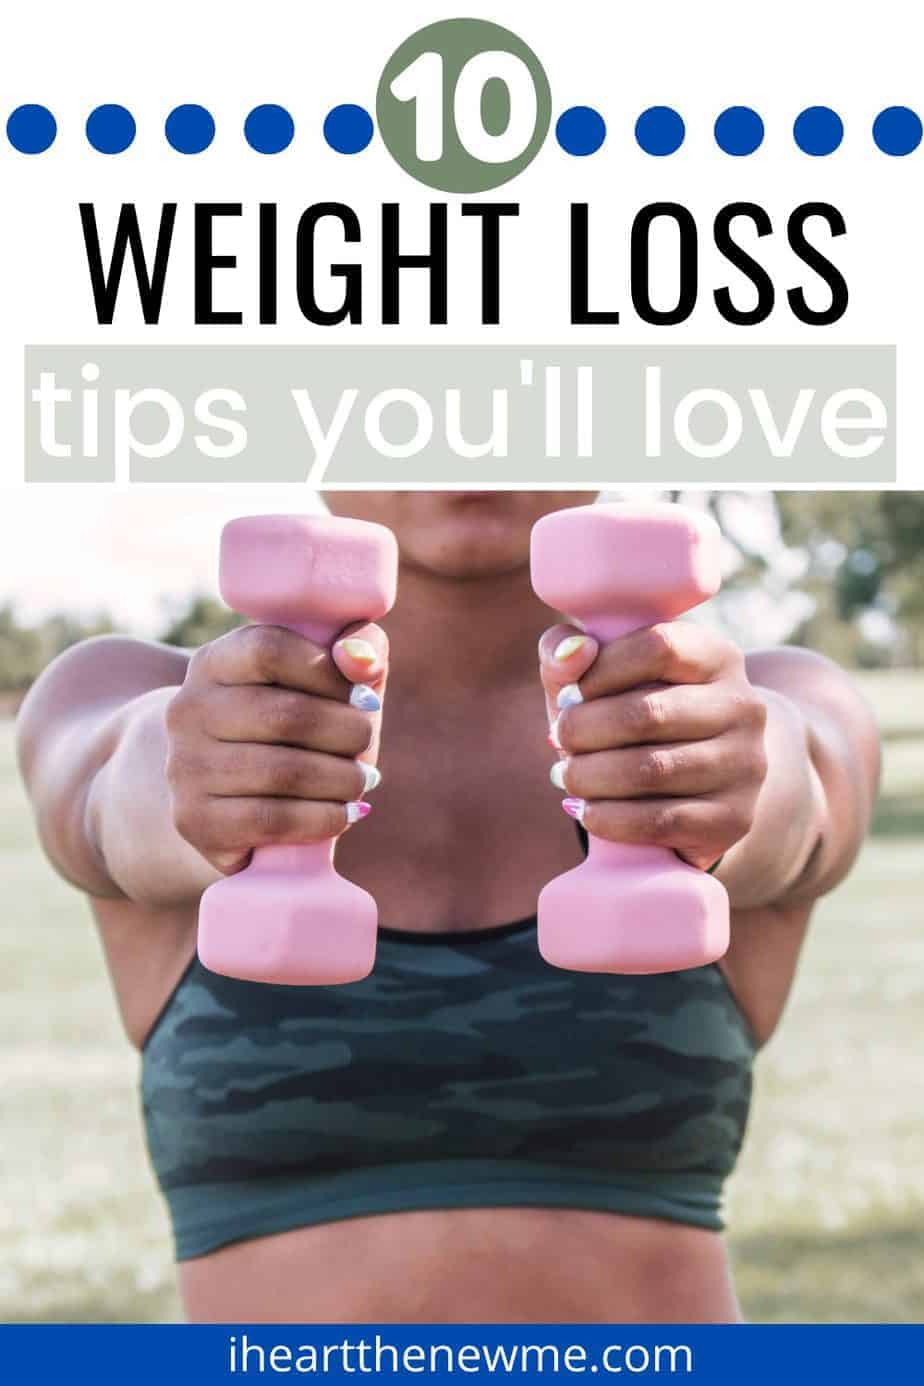 Tips to lose weight quickly and easily!